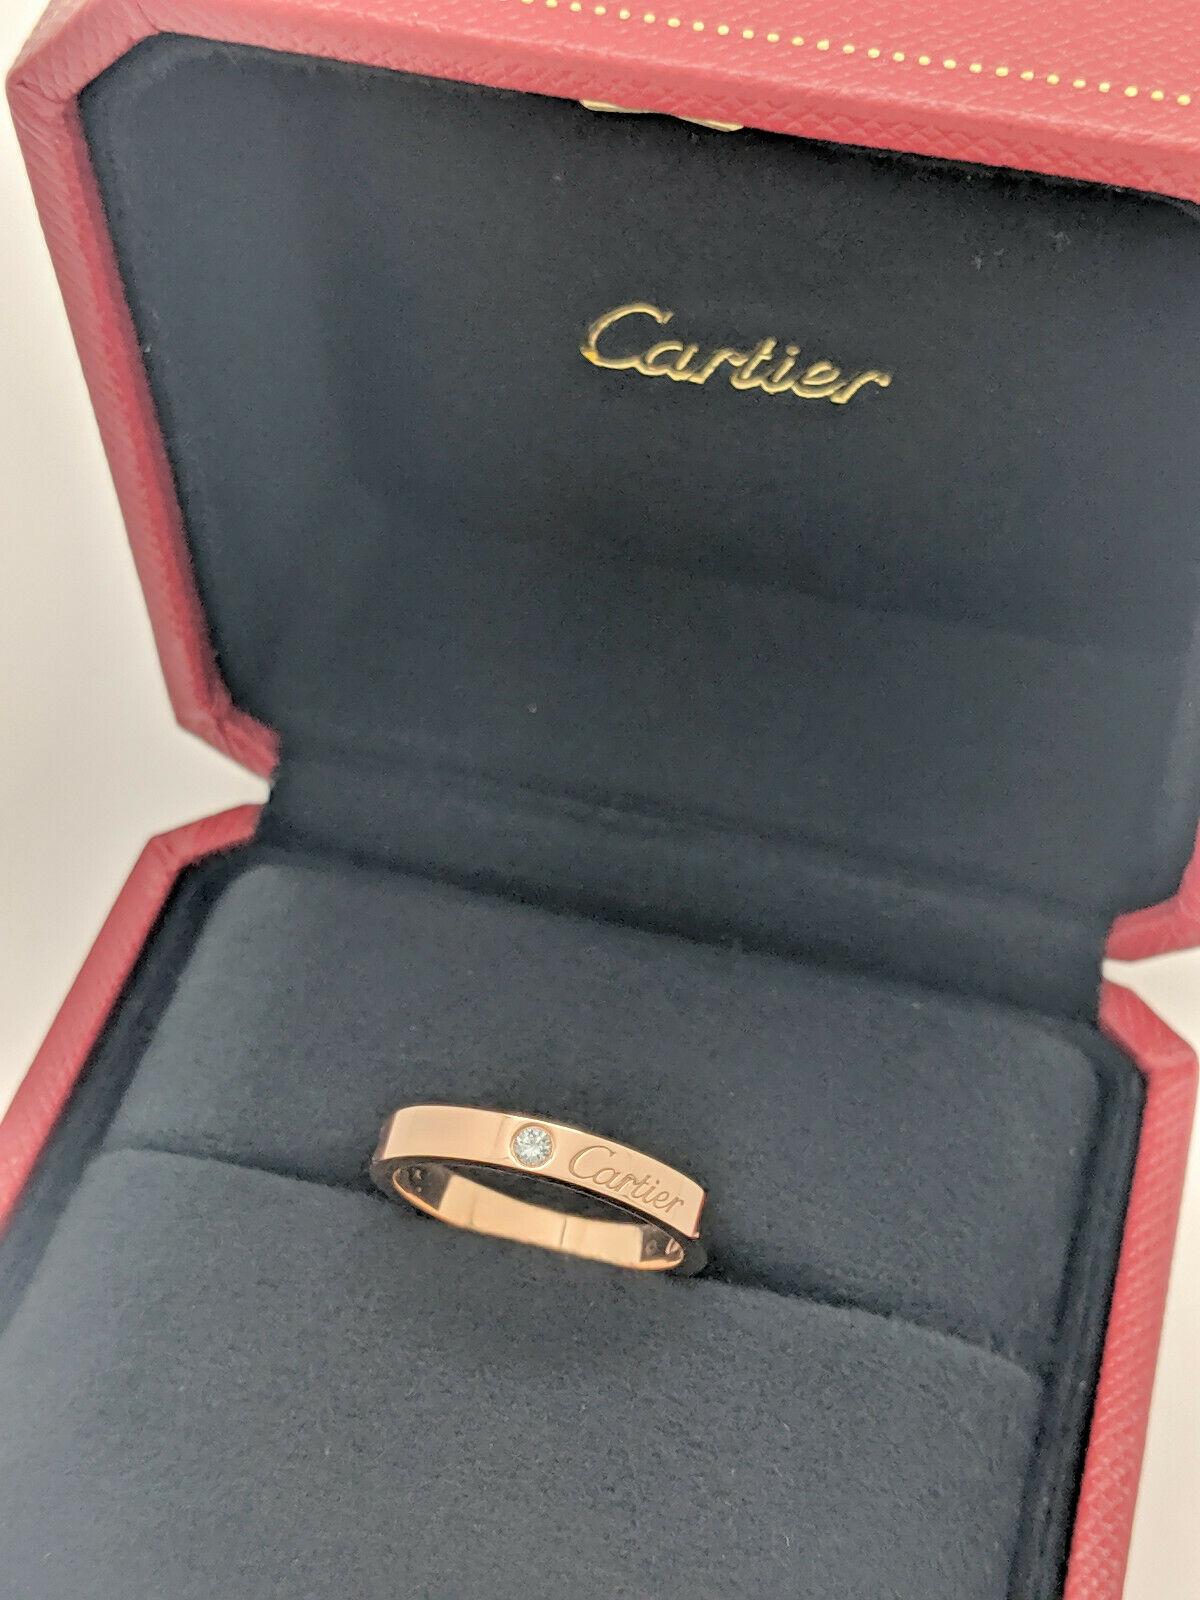 You are viewing an Authentic Cartier 